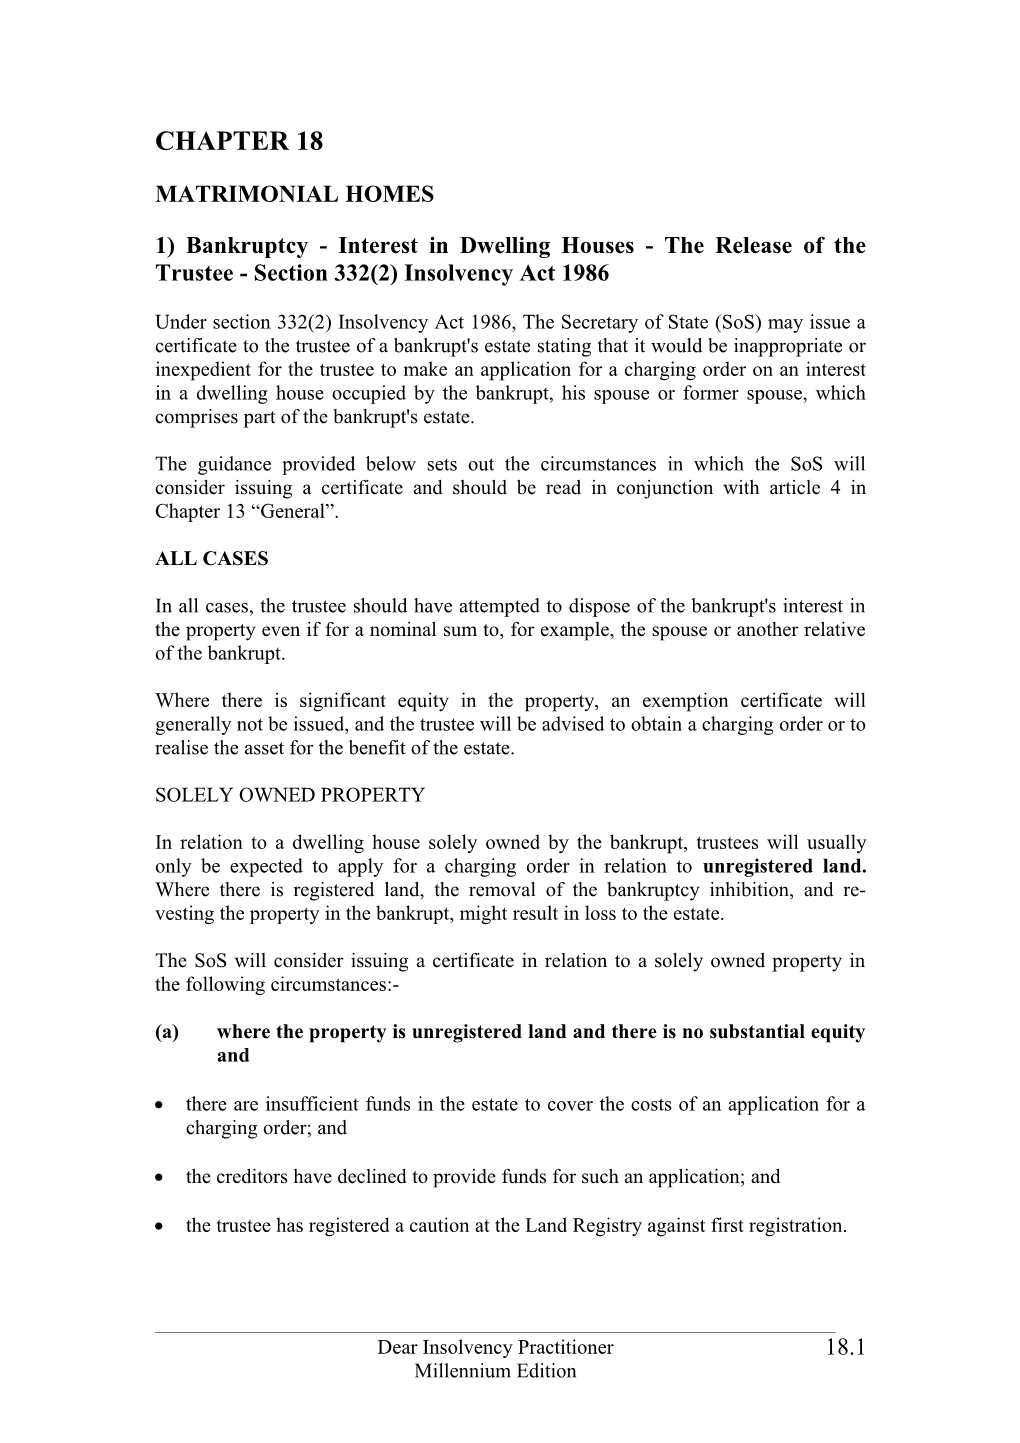 1) Bankruptcy - Interest in Dwelling Houses - the Release of the Trustee - Section 332(2)